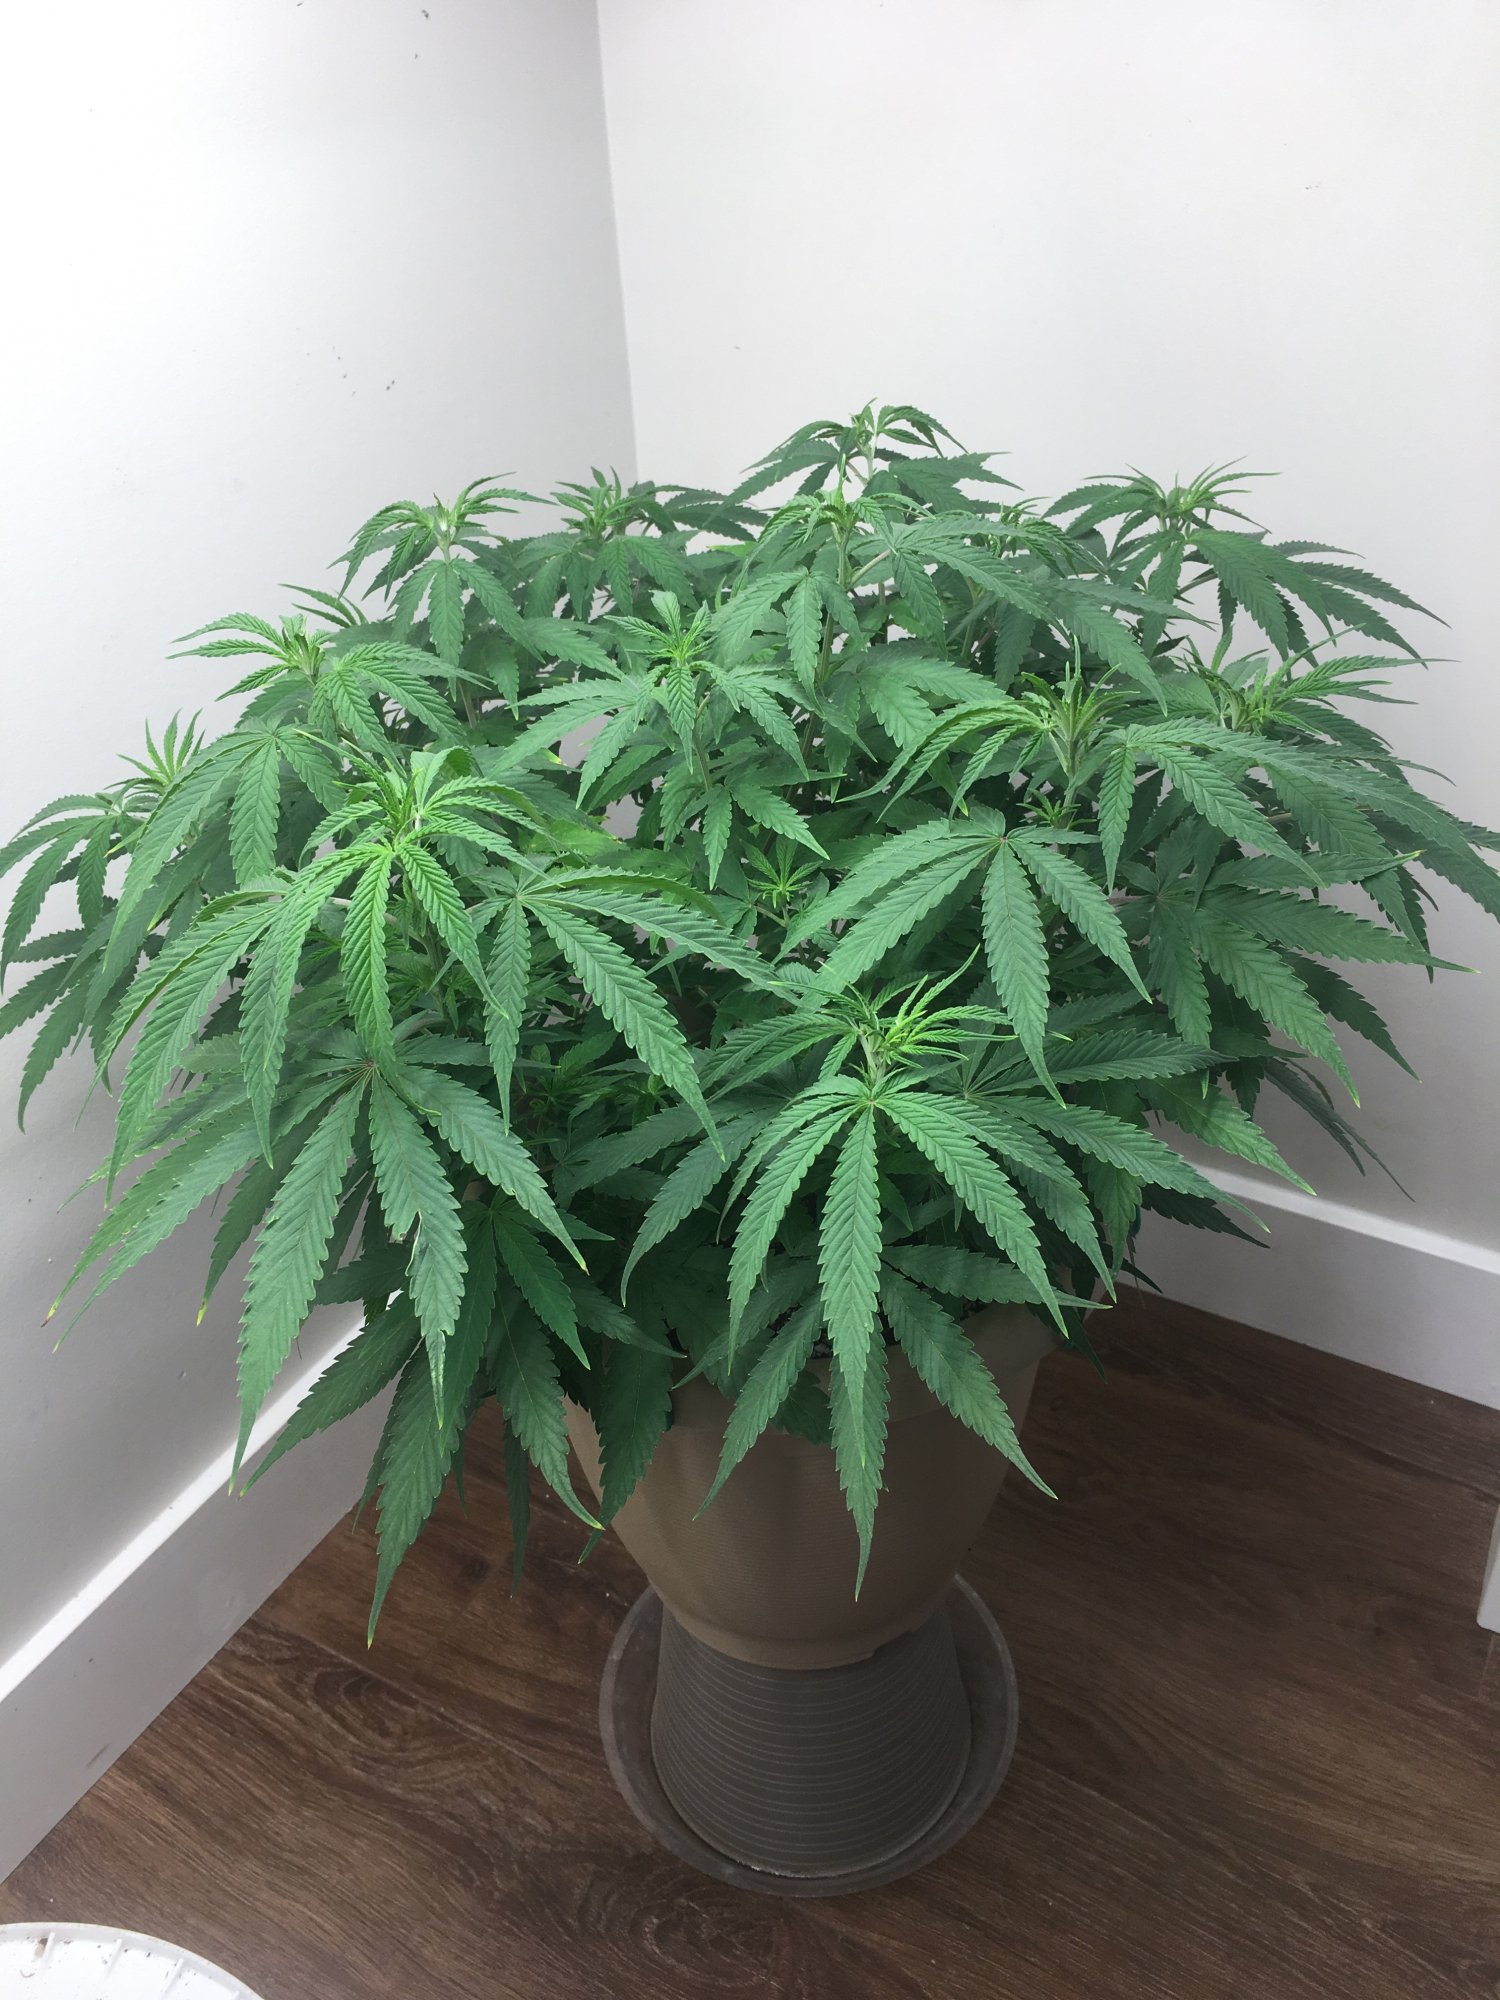 Need help with transplanting a plant 5